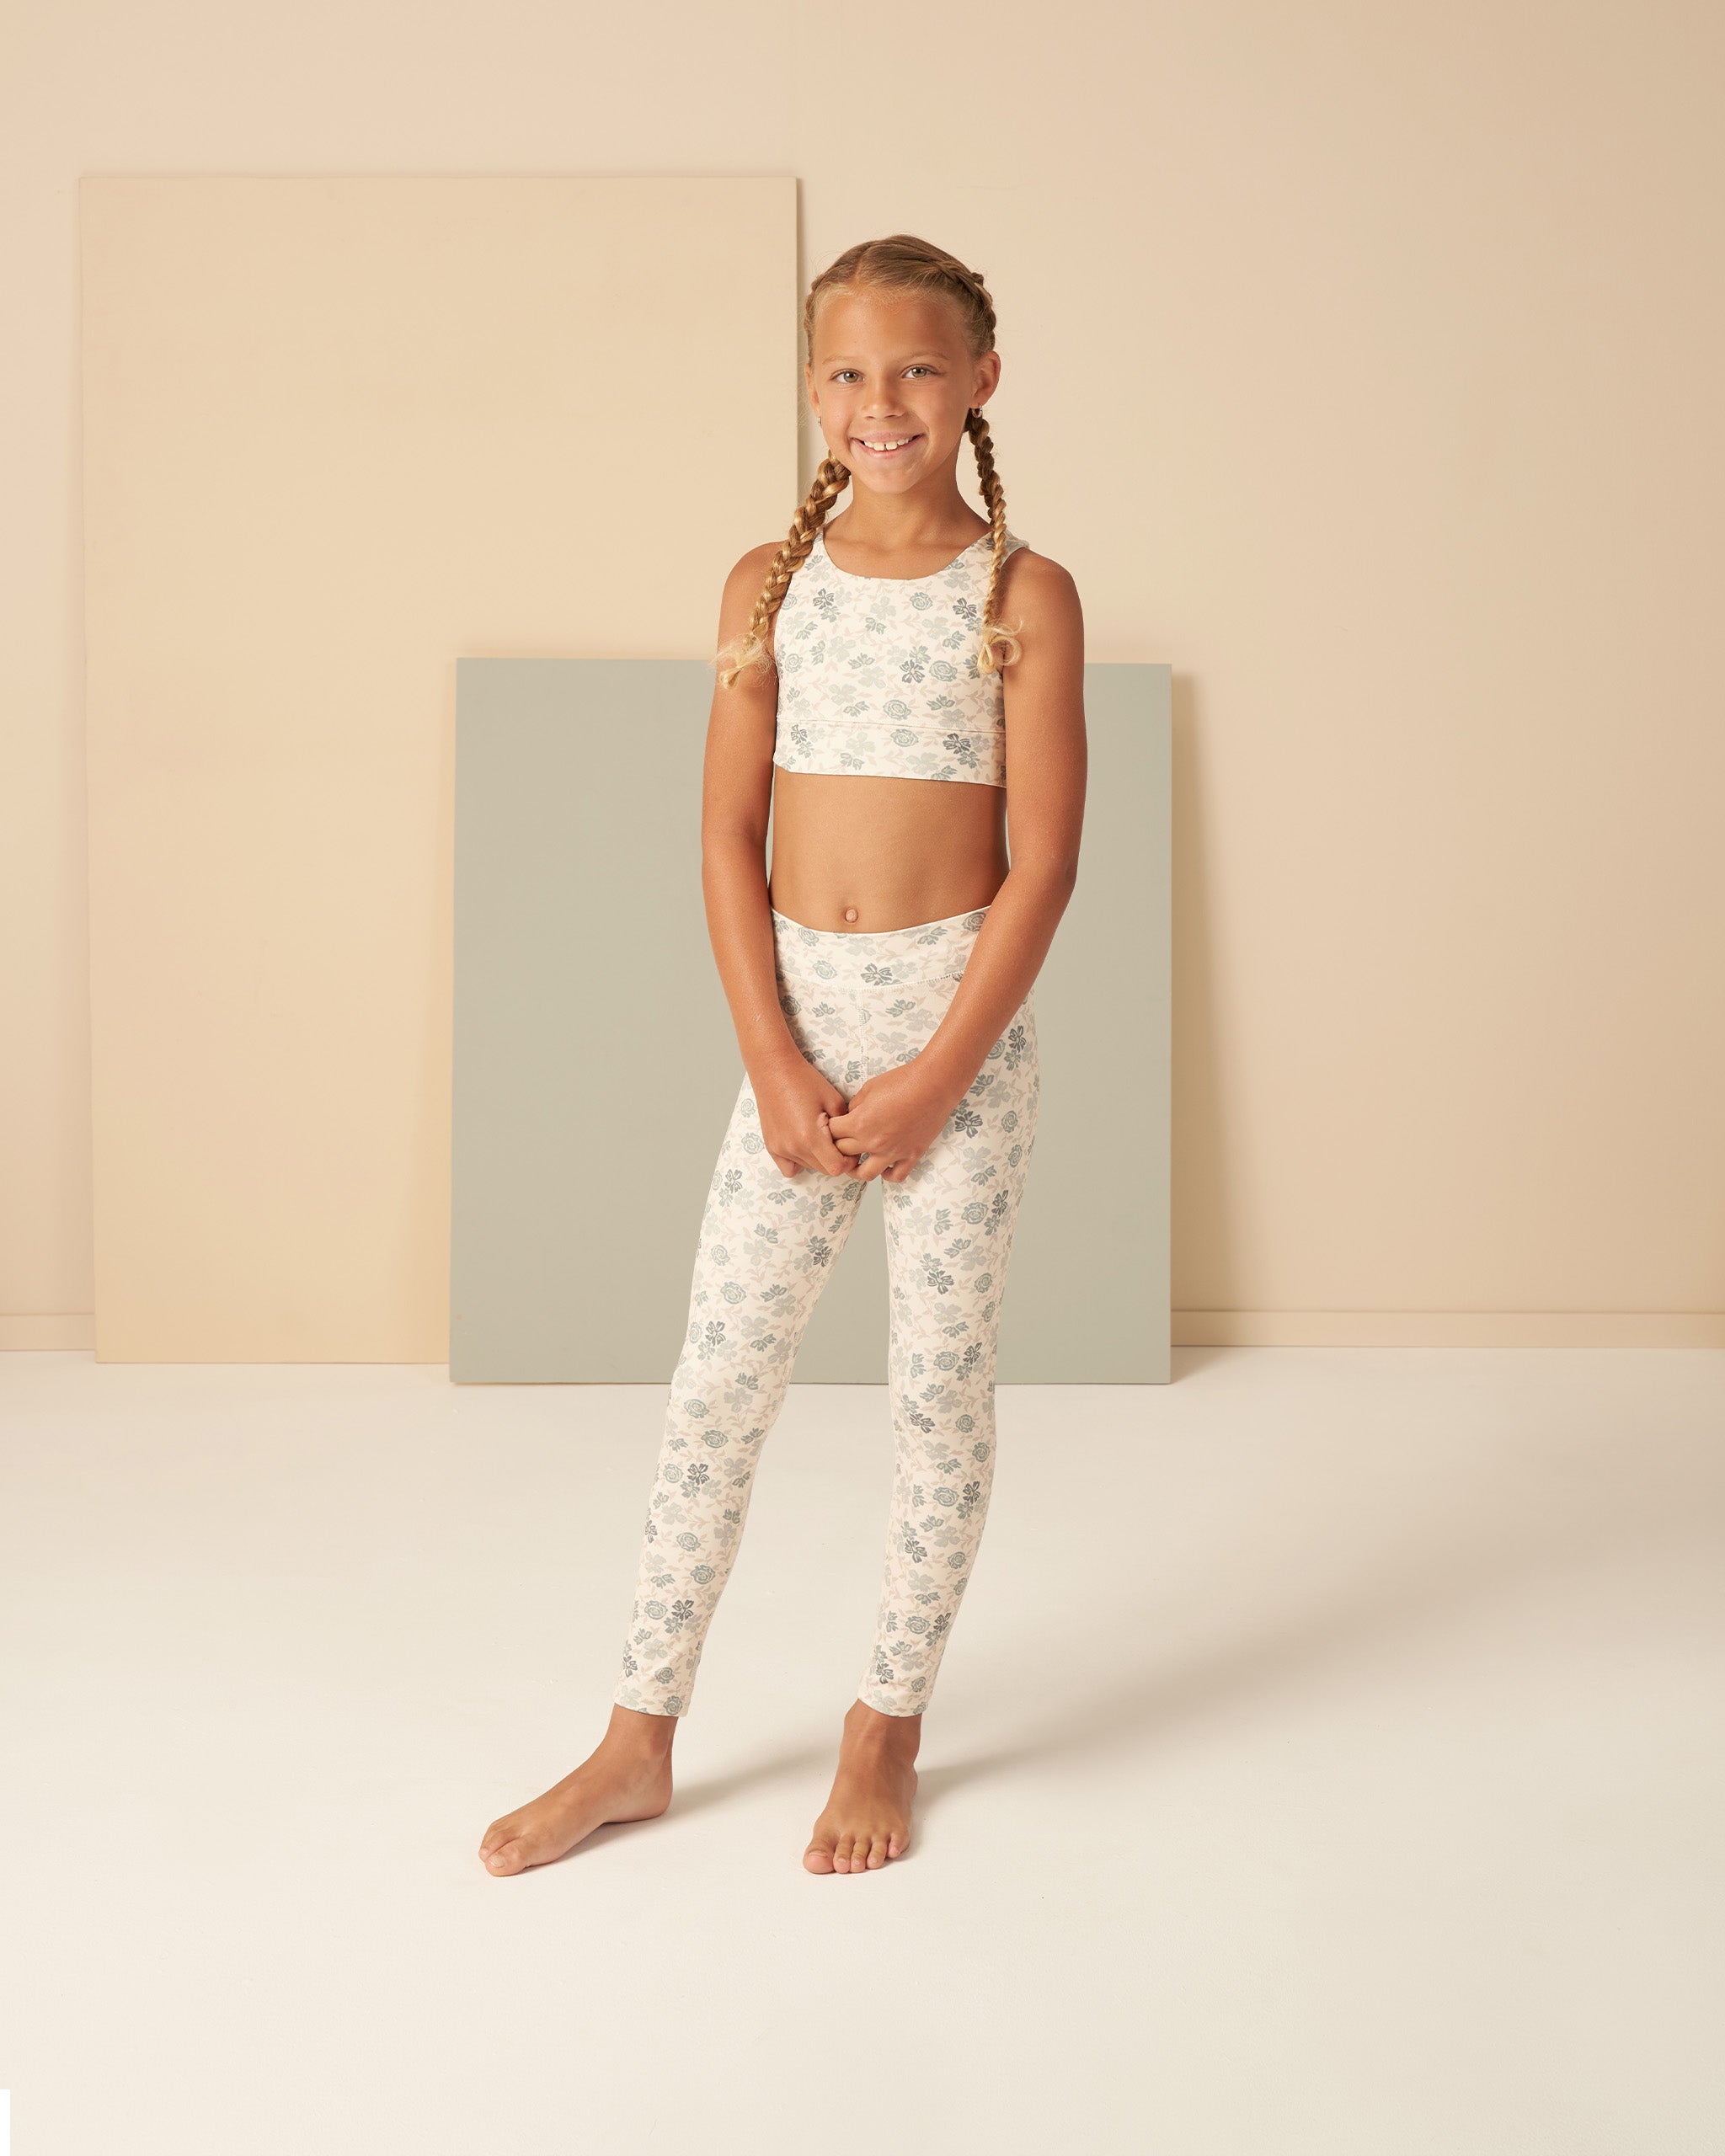 Swift Sports Bra || Blue Floral - Rylee + Cru | Kids Clothes | Trendy Baby Clothes | Modern Infant Outfits |